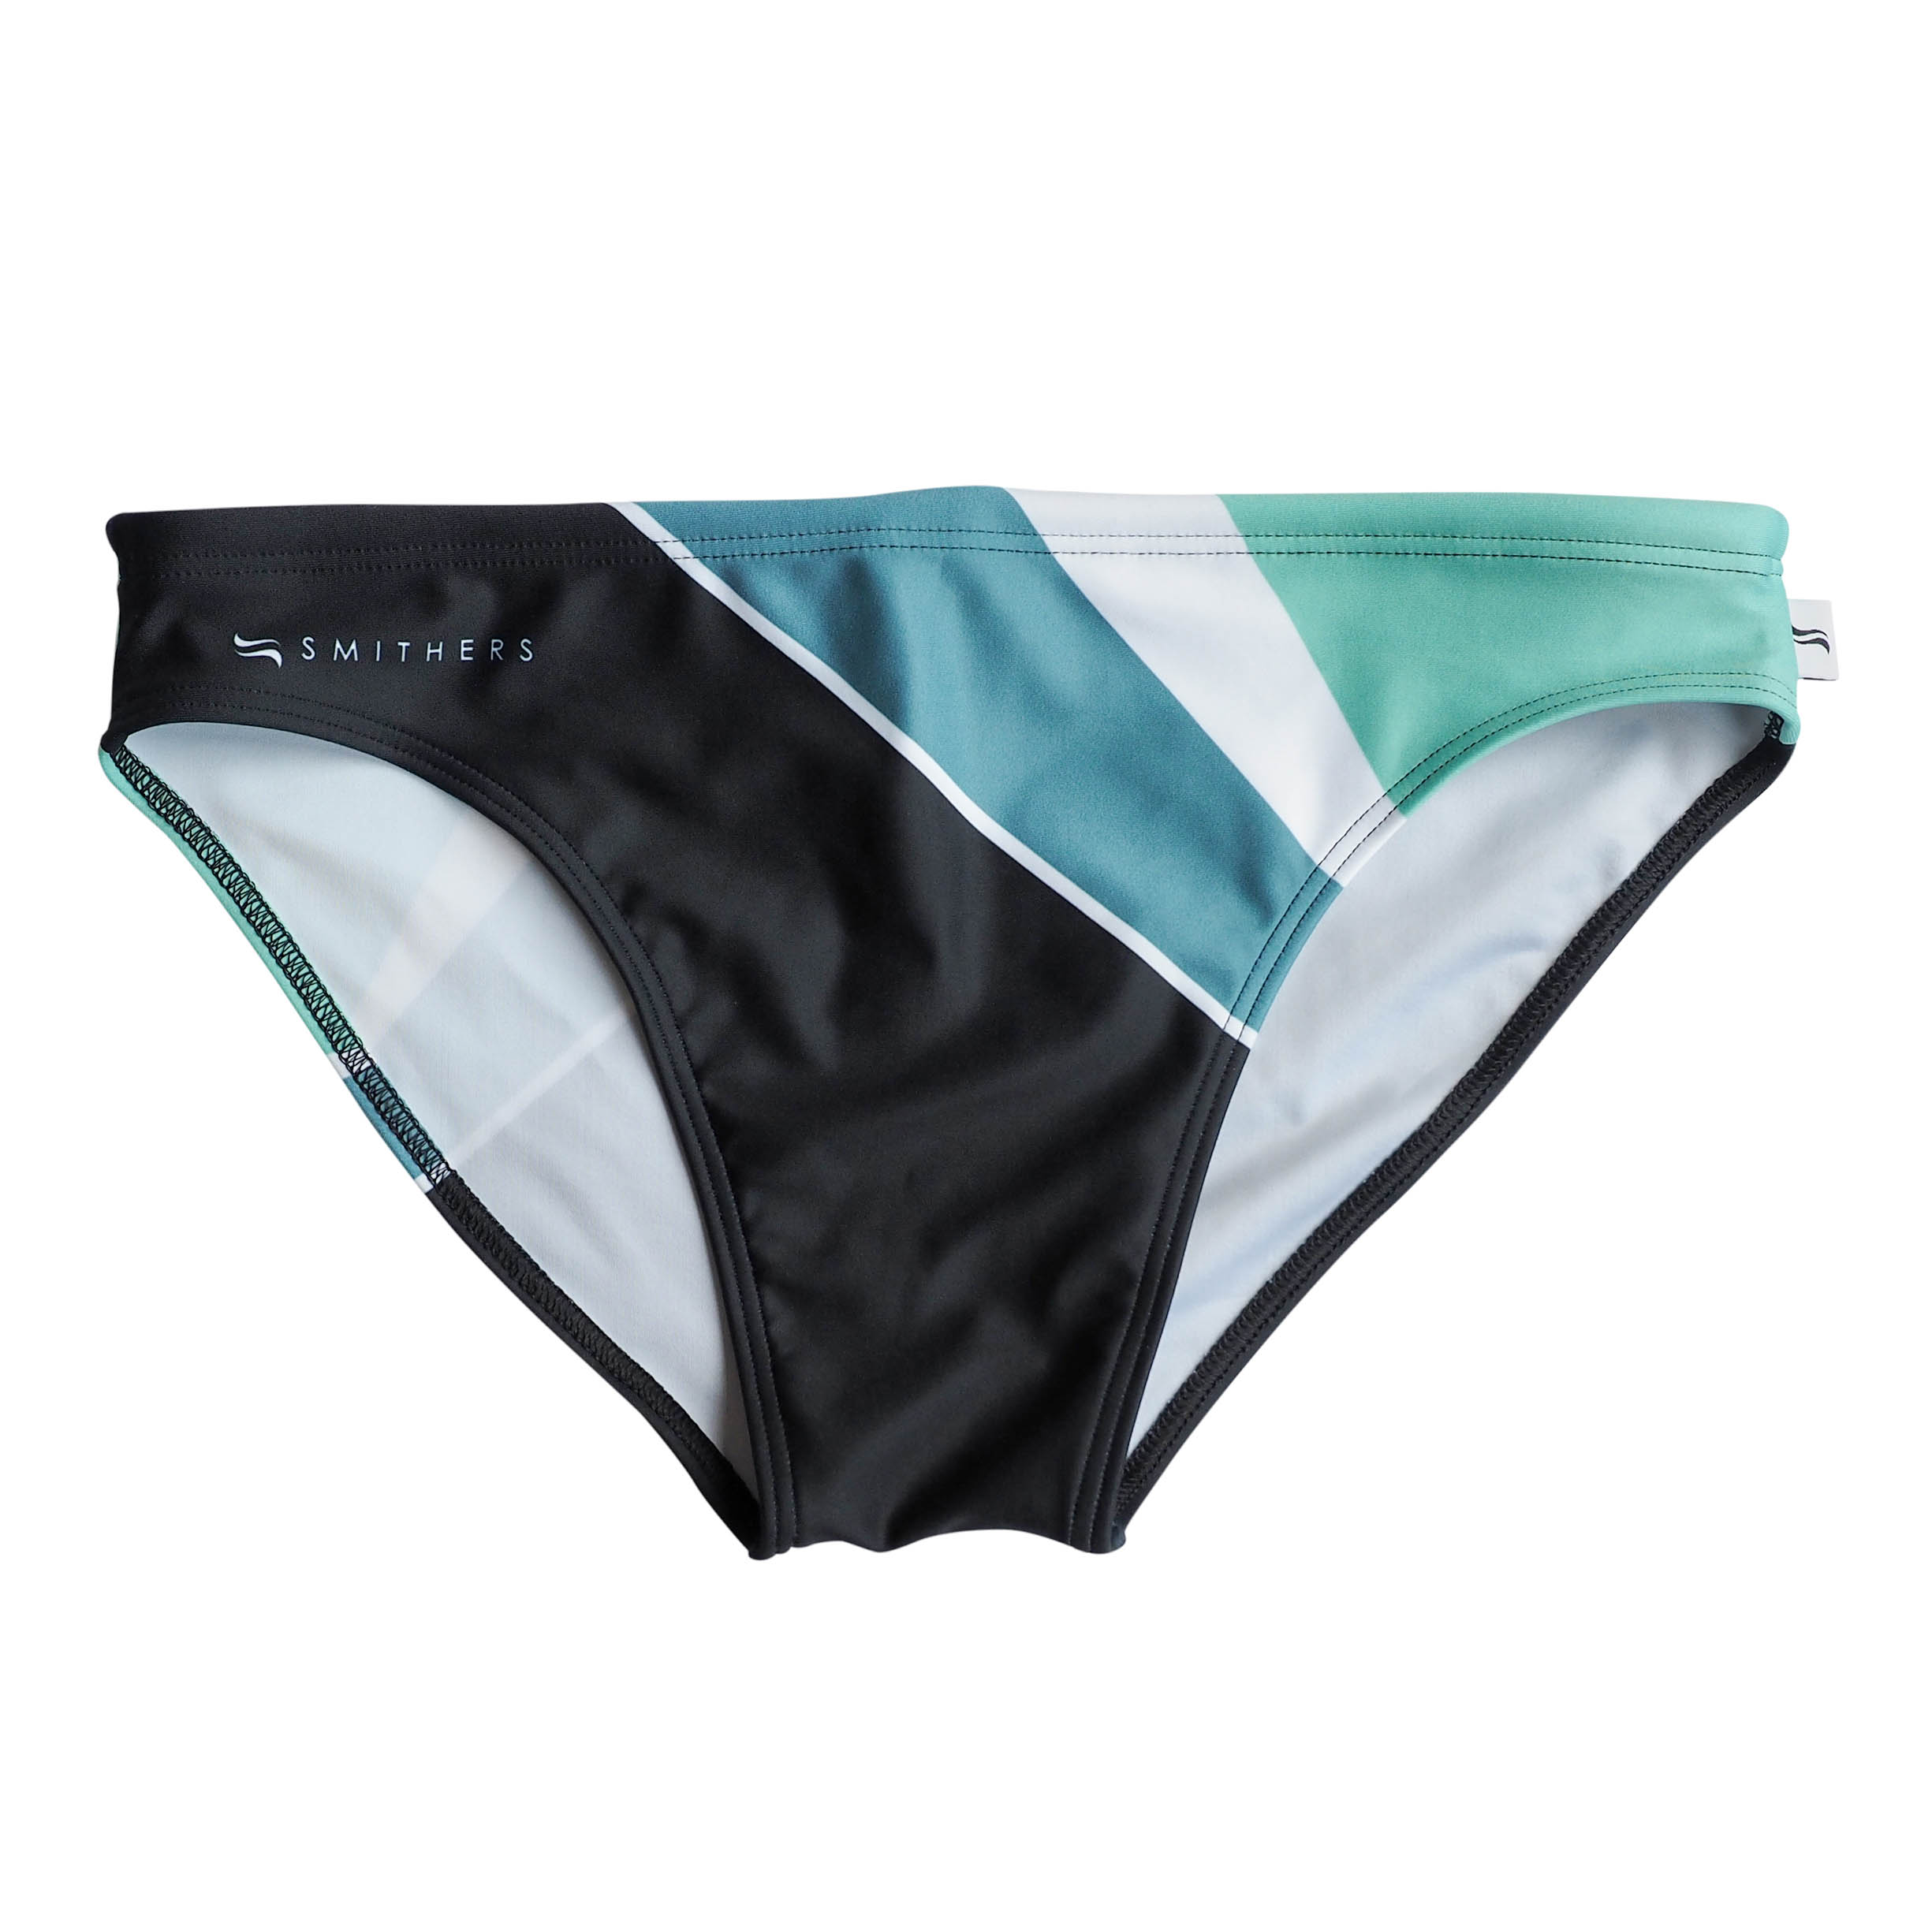 Smithers | Foundations | Loyal | Classic Briefs